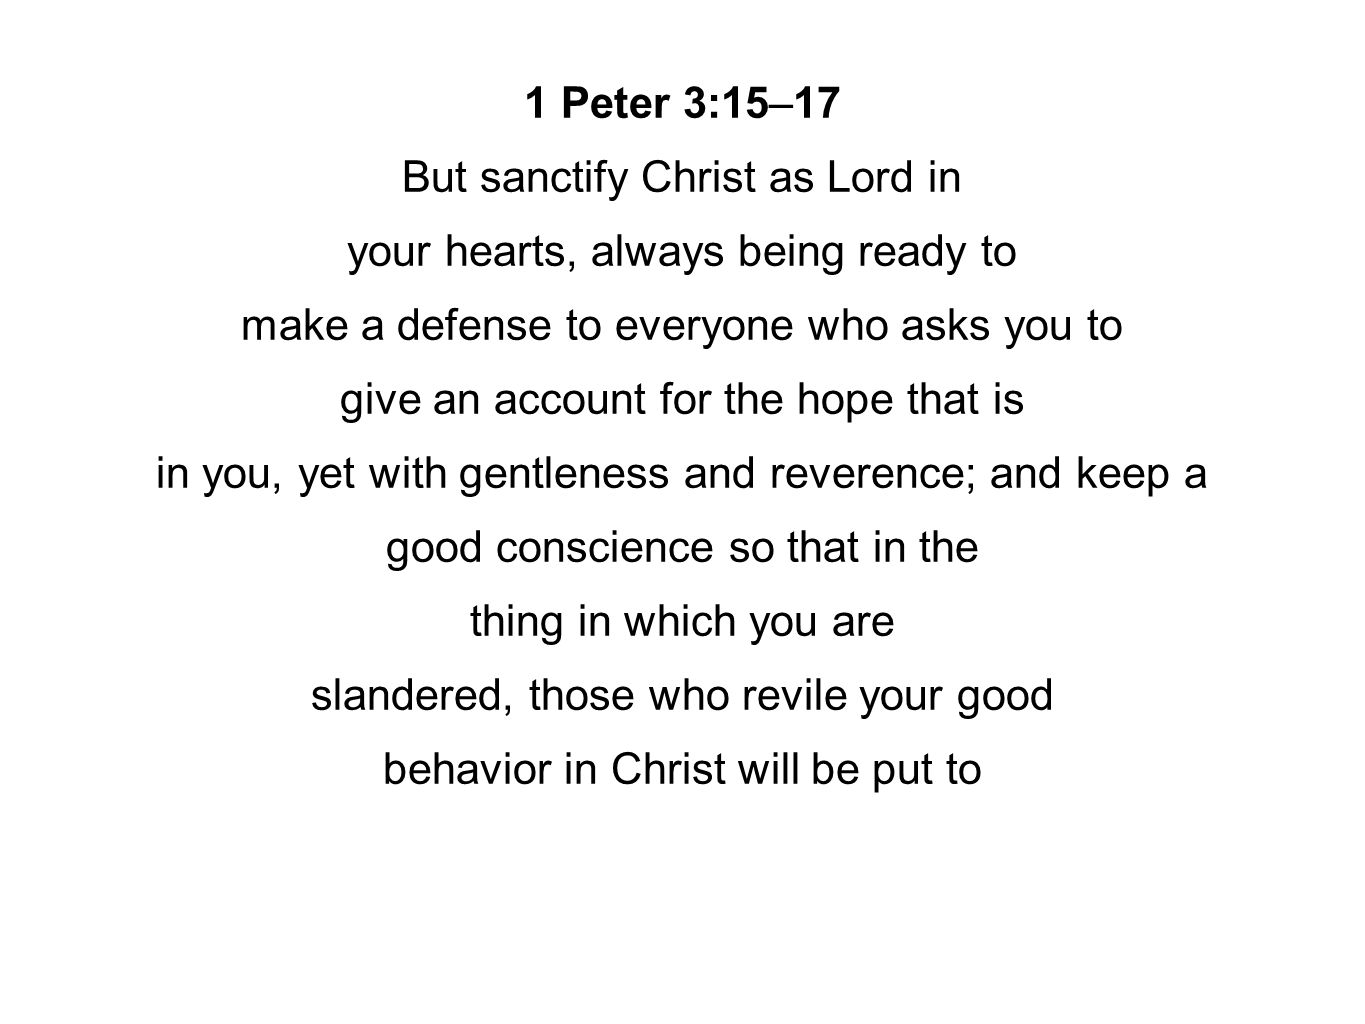 1 Peter 3:15–17 But sanctify Christ as Lord in your hearts, always being ready to make a defense to everyone who asks you to give an account for the hope that is in you, yet with gentleness and reverence; and keep a good conscience so that in the thing in which you are slandered, those who revile your good behavior in Christ will be put to